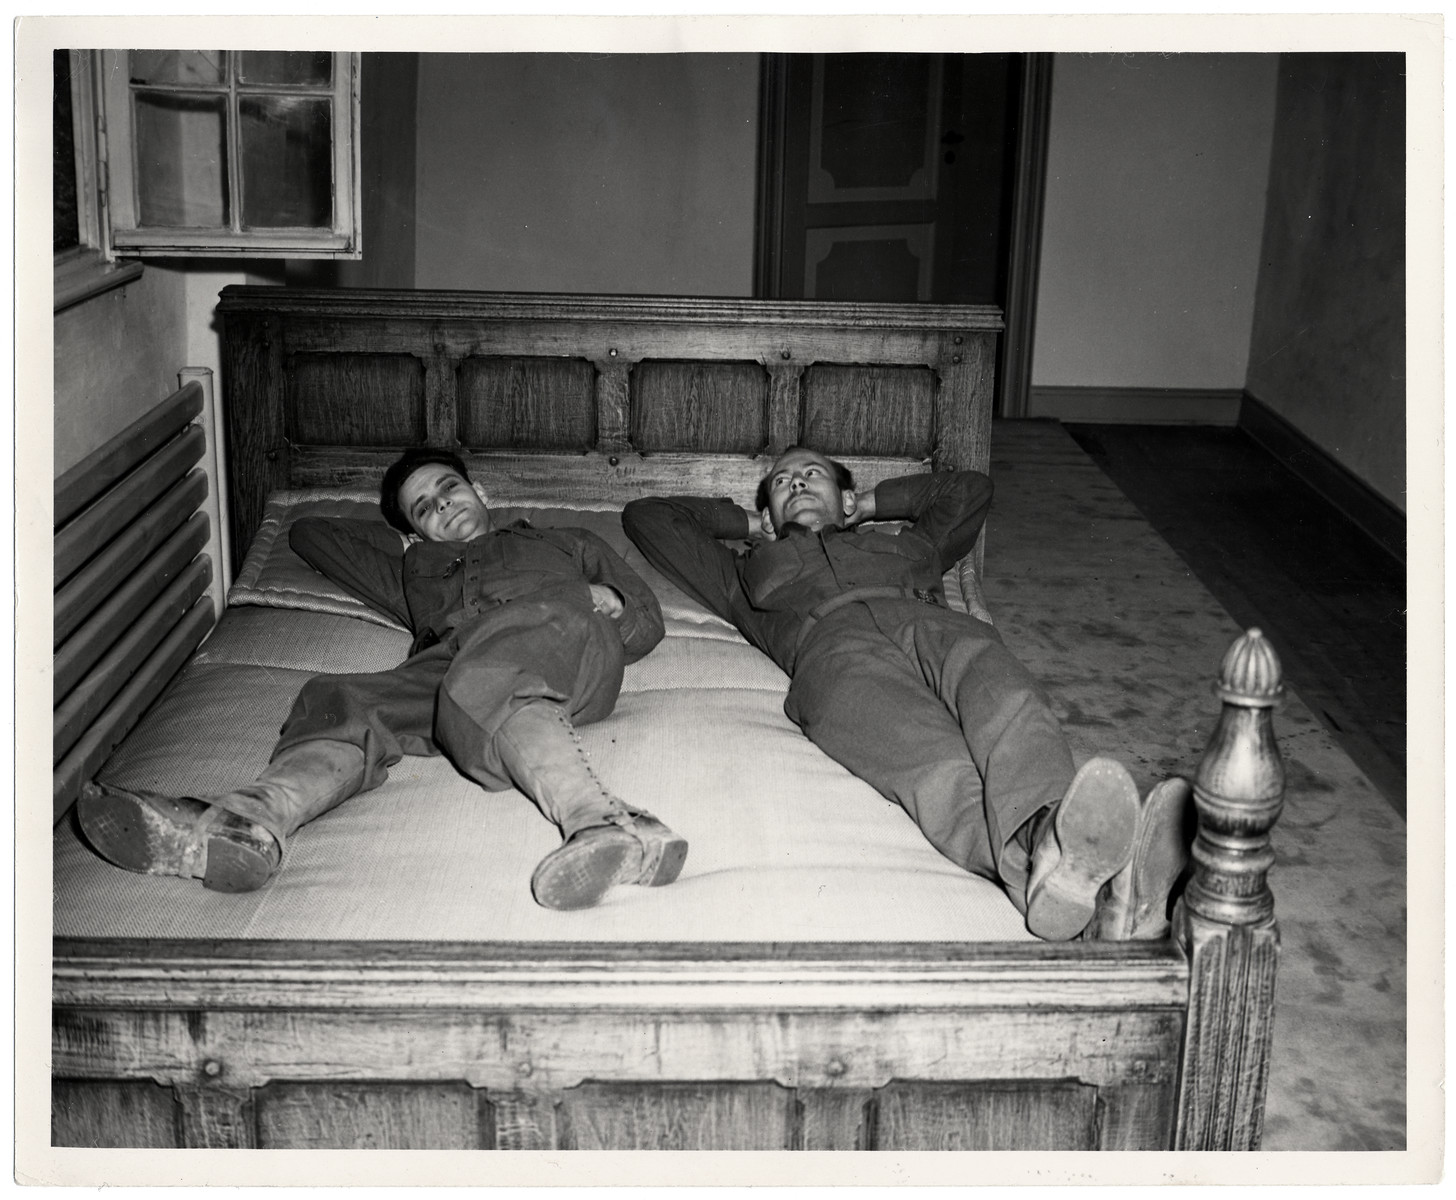 Sgt. Everett Steiger from Salem, Oregon and T/4 Joseph W. Eaton relax on the bed that had belonged to Joseph Goebbels at Schloss Rheydt. 

It was moved into the hallway by the GI's who are now billeted in the castle and need his room.